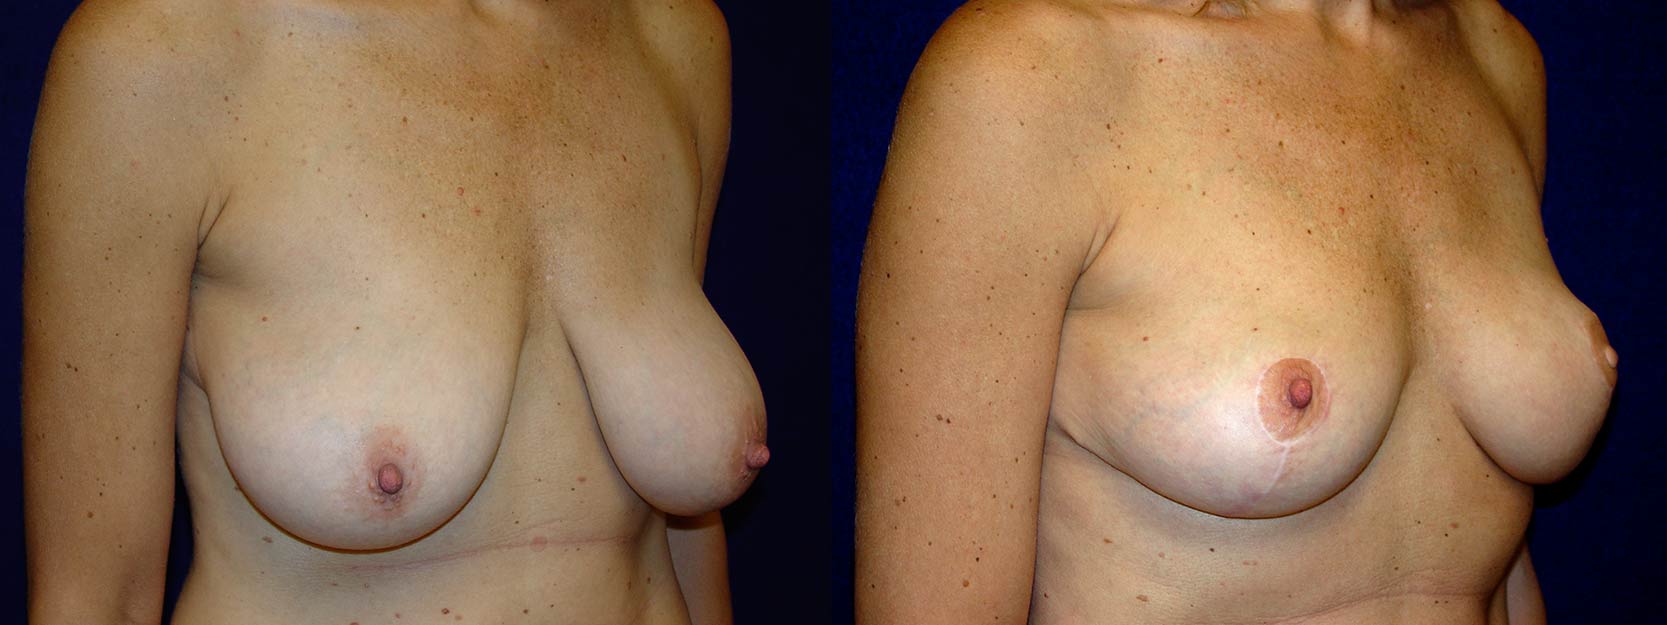 Right 3/4 View - Breast Reconstruction